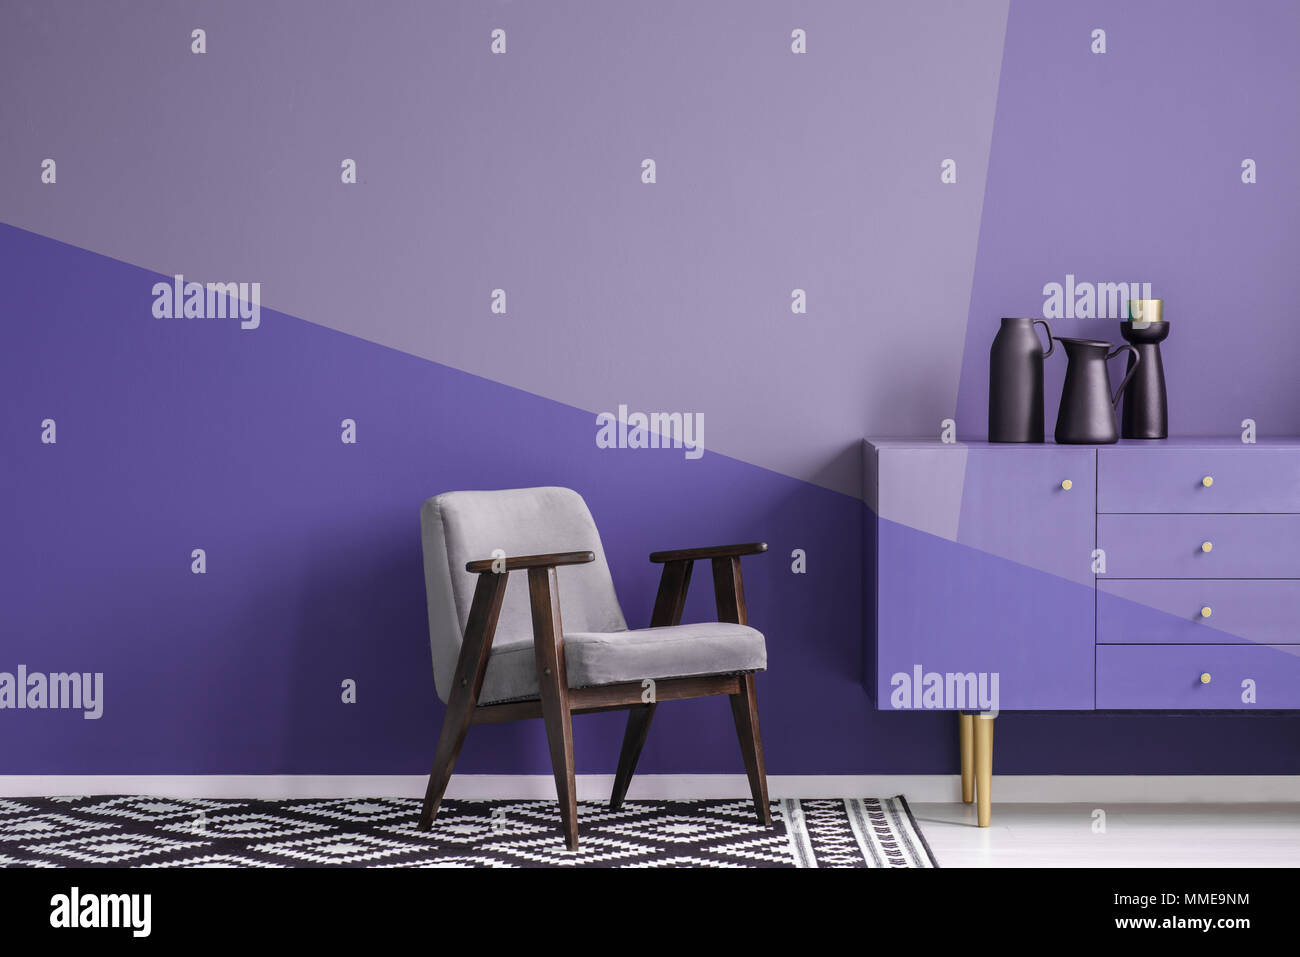 Real photo of a gray, wooden armchair on patterned, black and white rug in creative living room interior with geometric, violet wall and cupboard Stock Photo